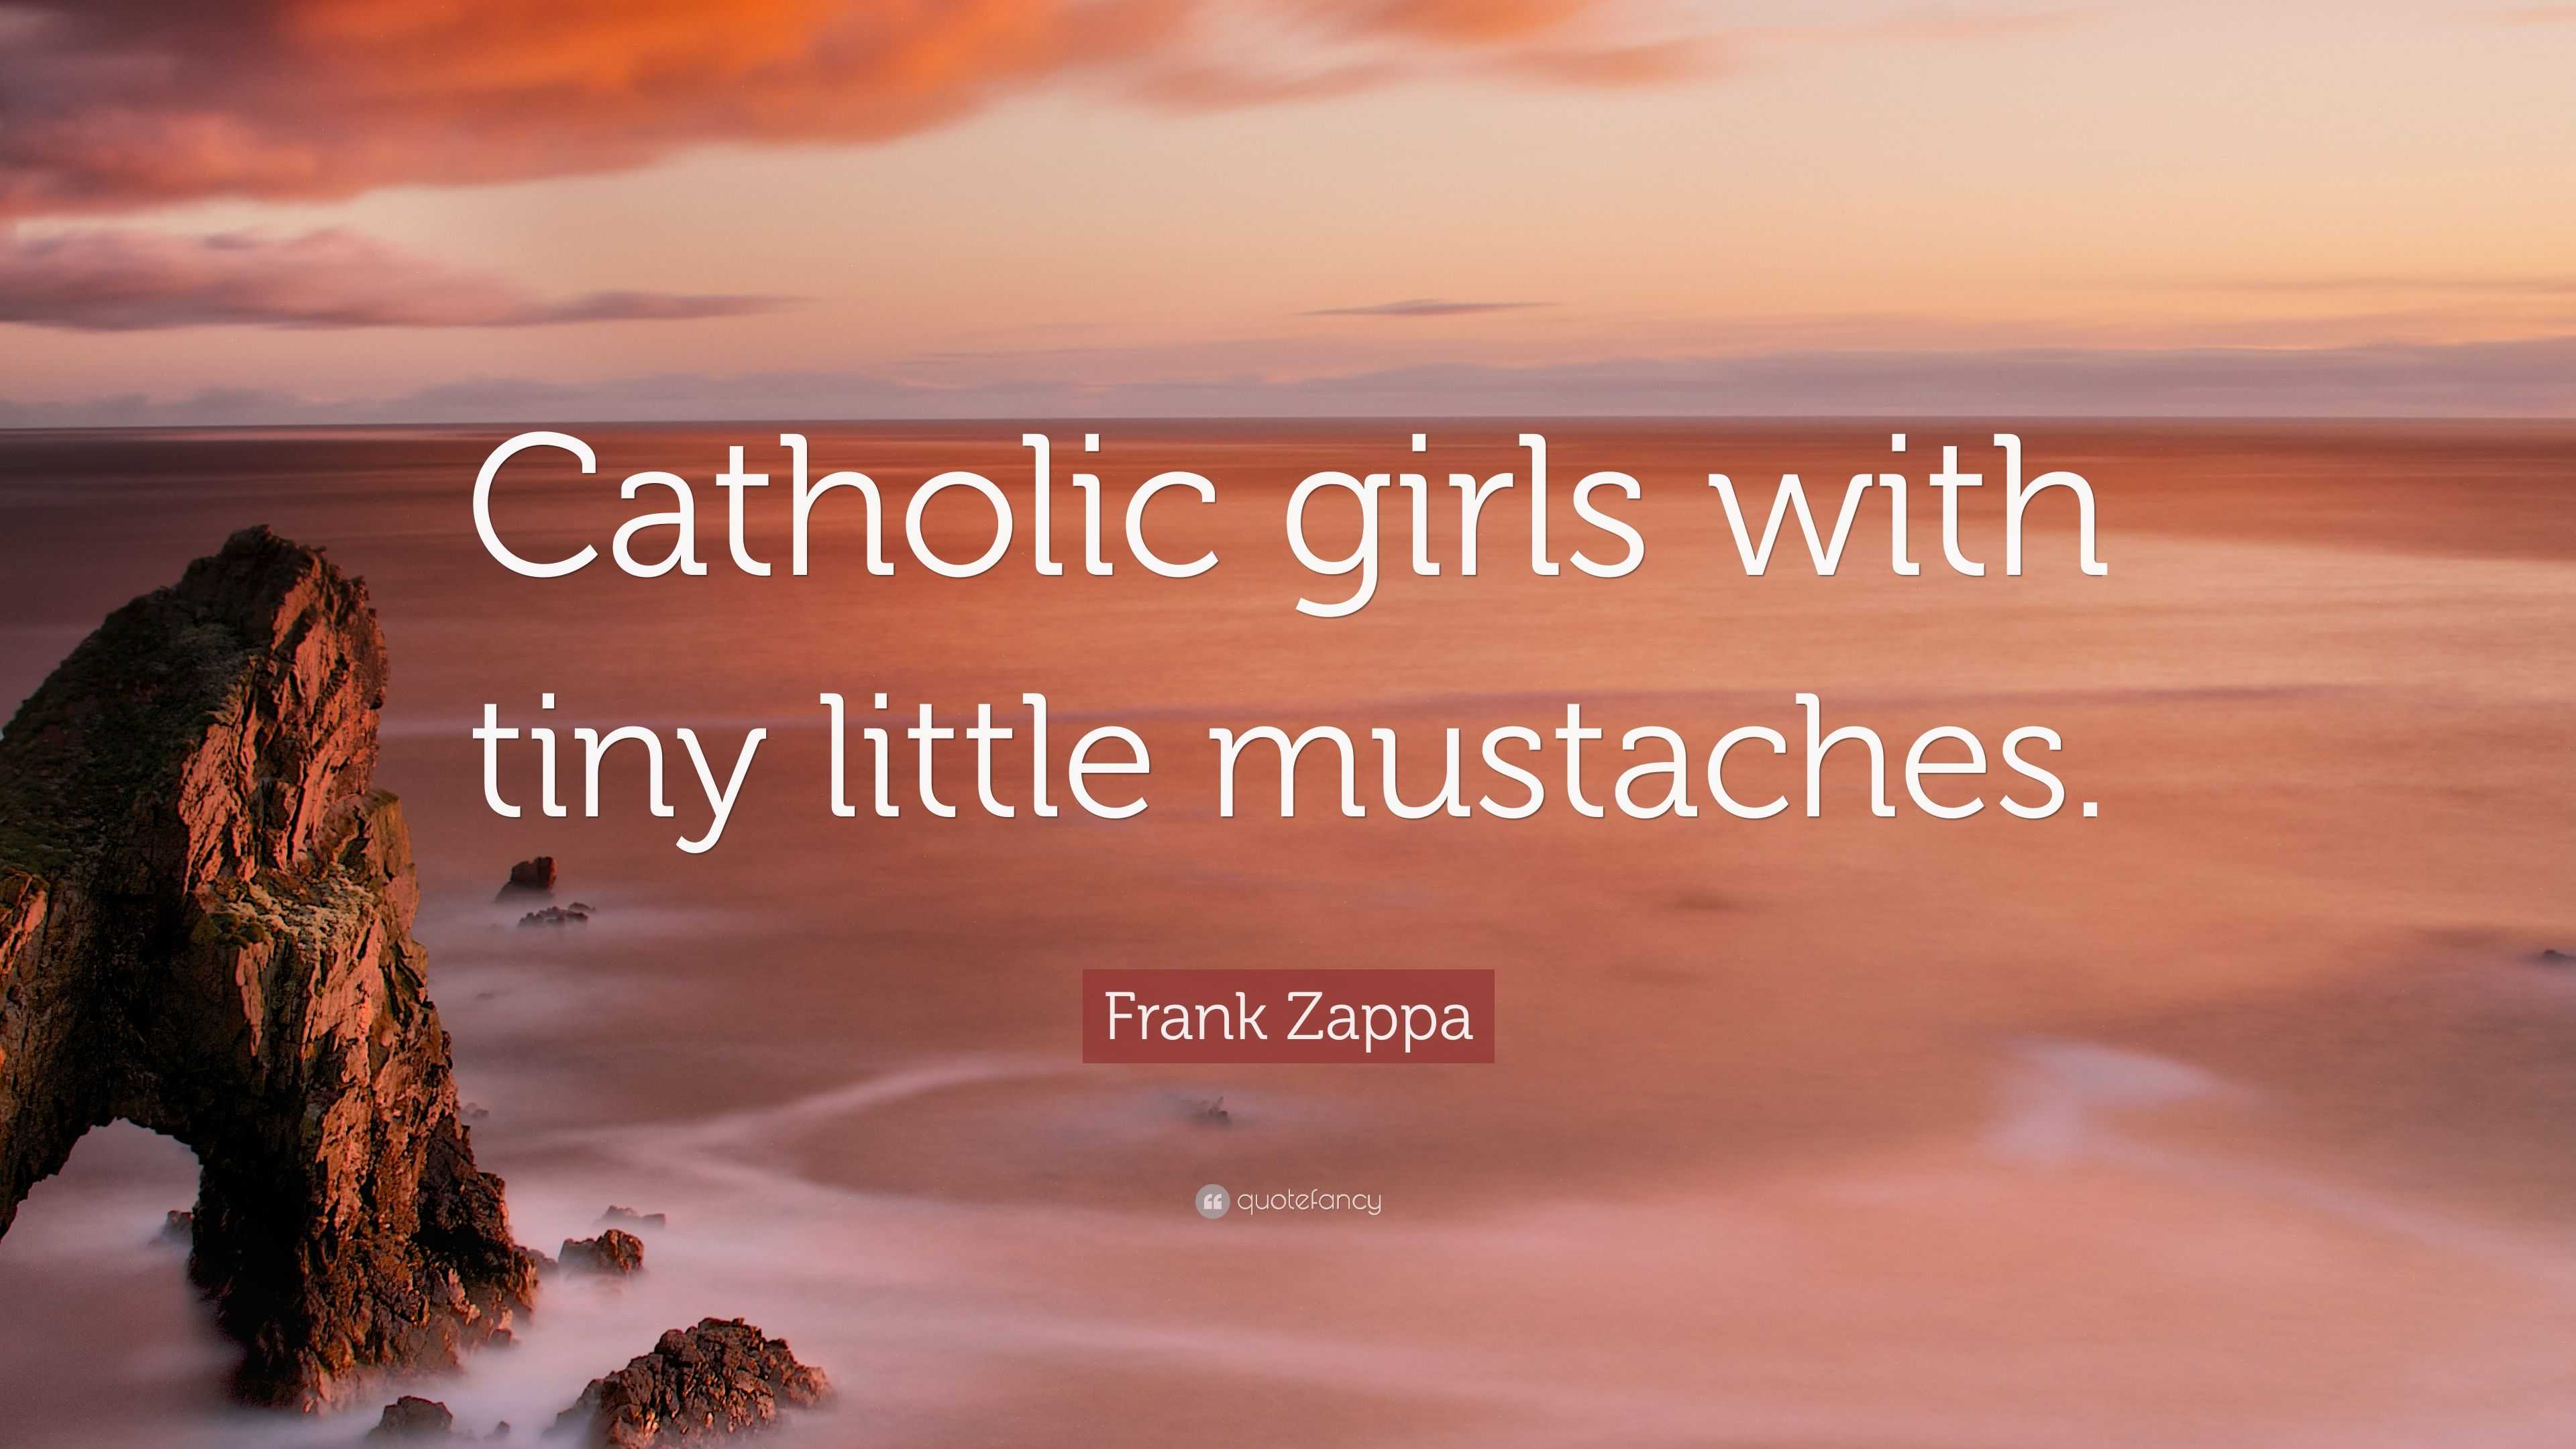 Frank Zappa Quote: “Catholic girls with tiny little mustaches.”